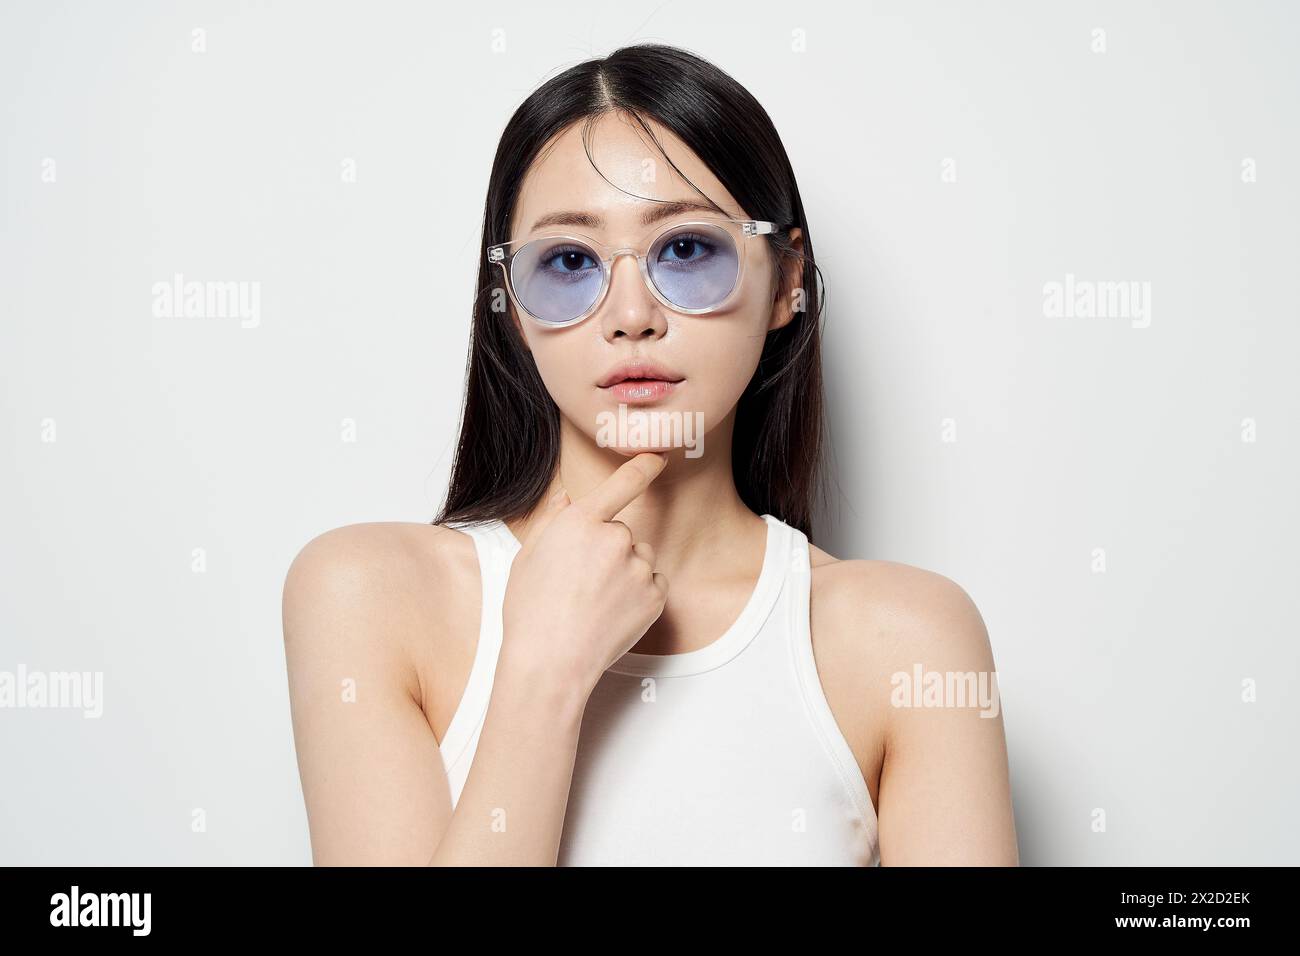 Asian woman staring straight ahead in clear sunglasses Stock Photo